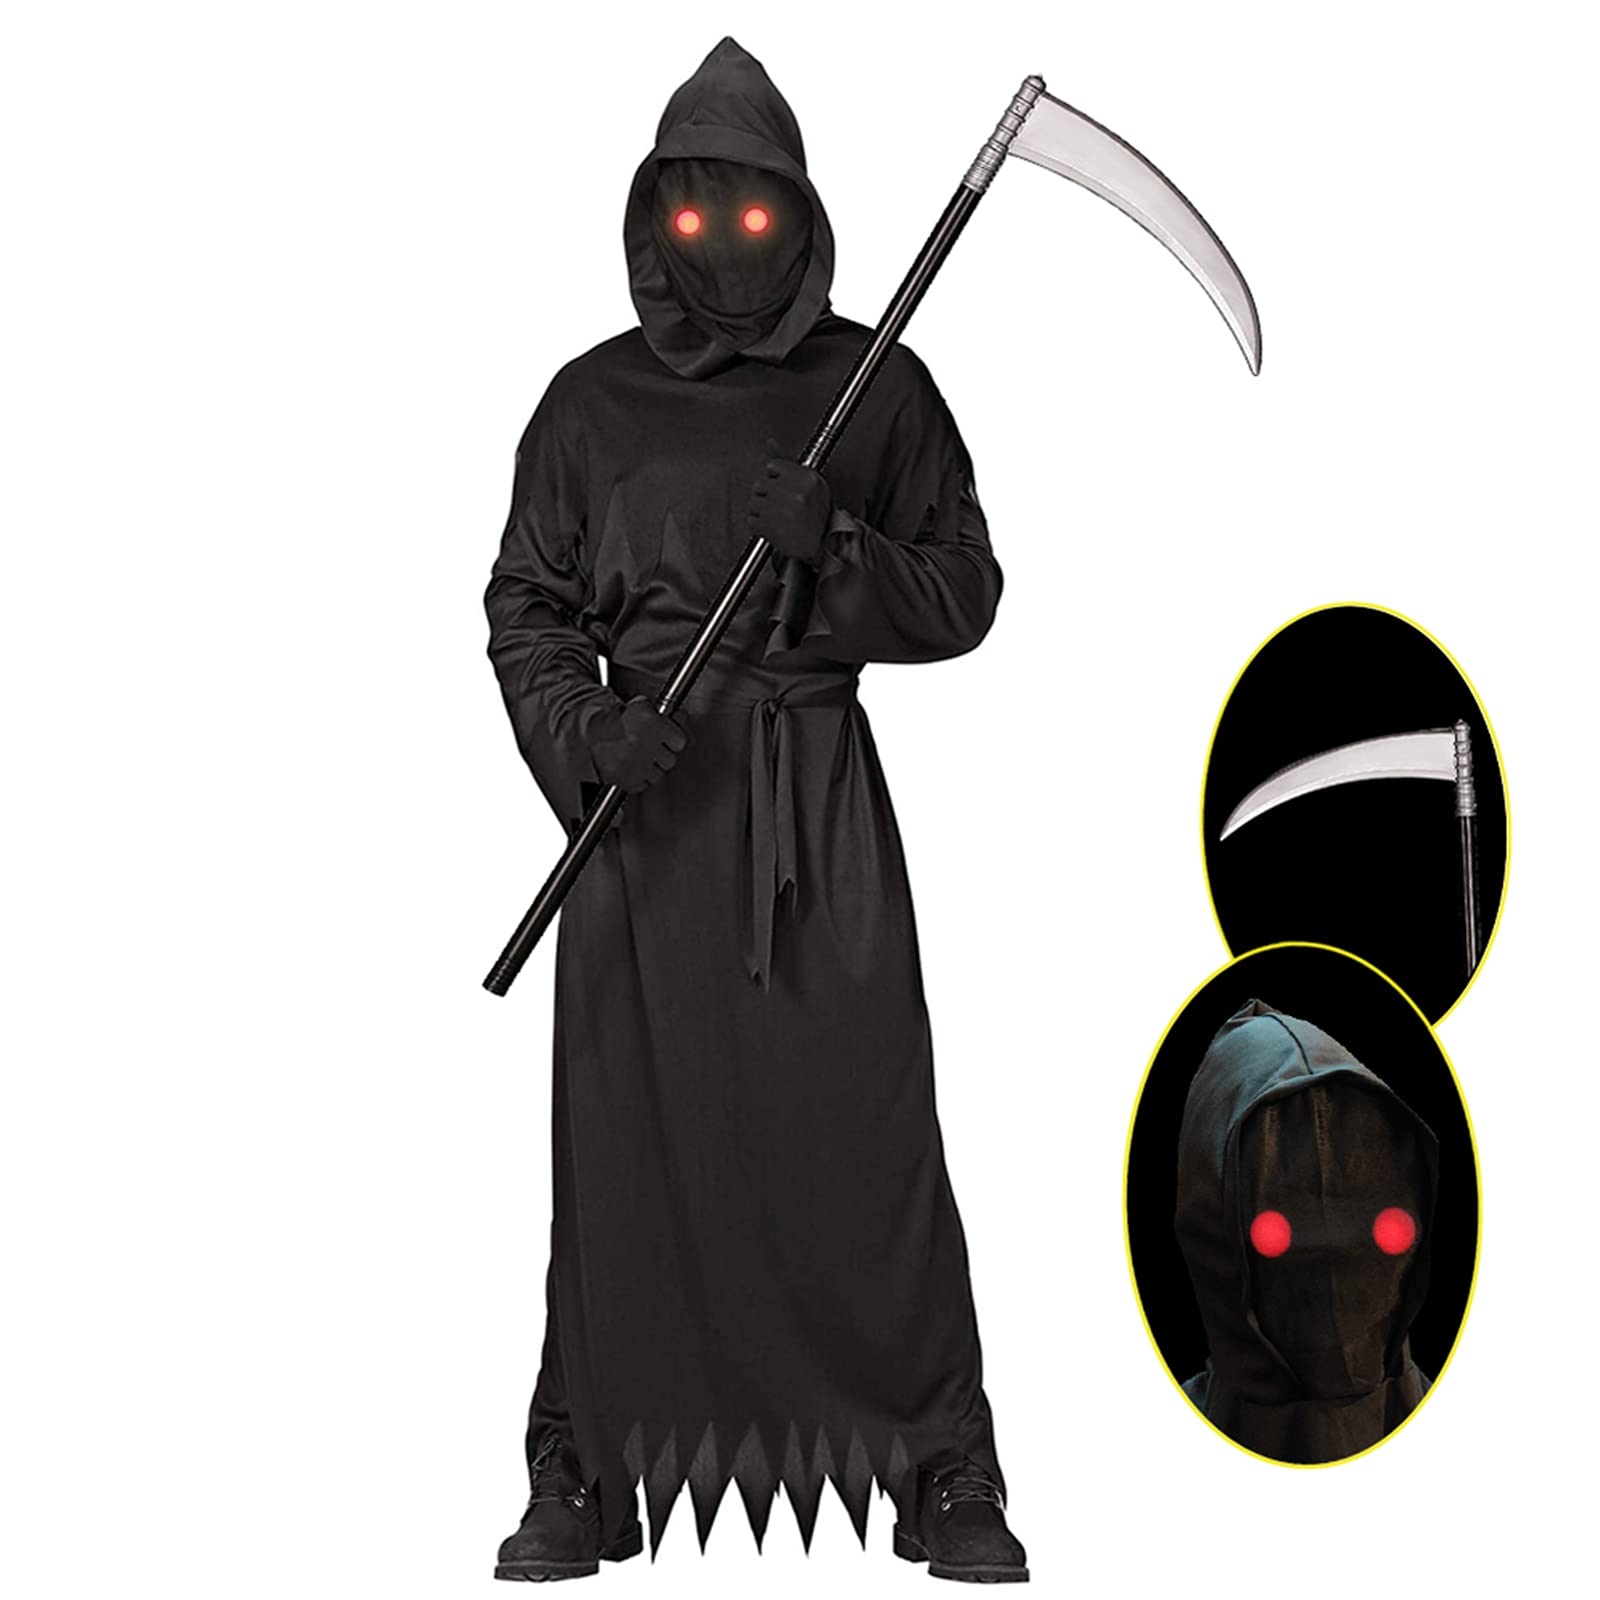 Grim Reaper Halloween Costume with Glowing Red Eyes for Adult, Scythe Included